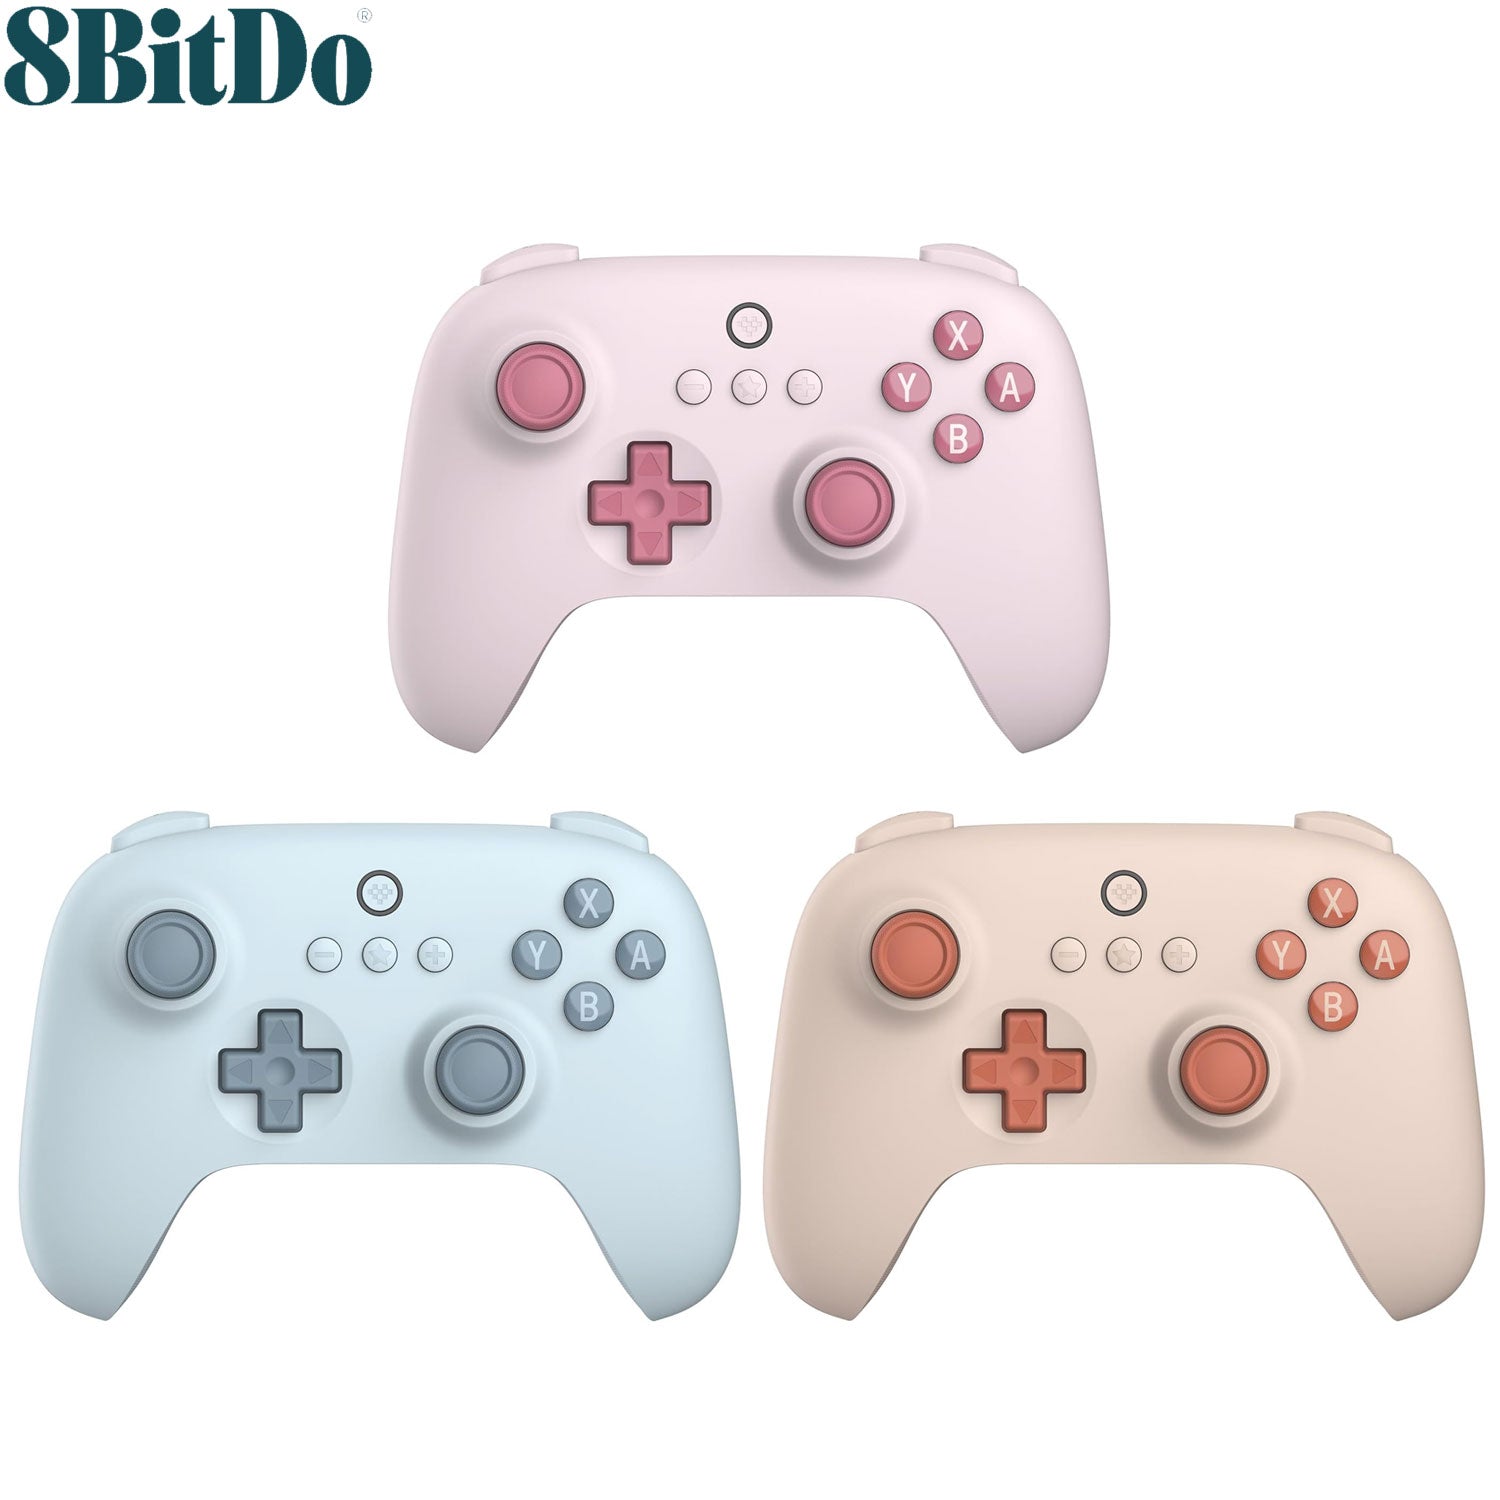 8BitDo Ultimate C Bluetooth Controller for Nintendo Switch